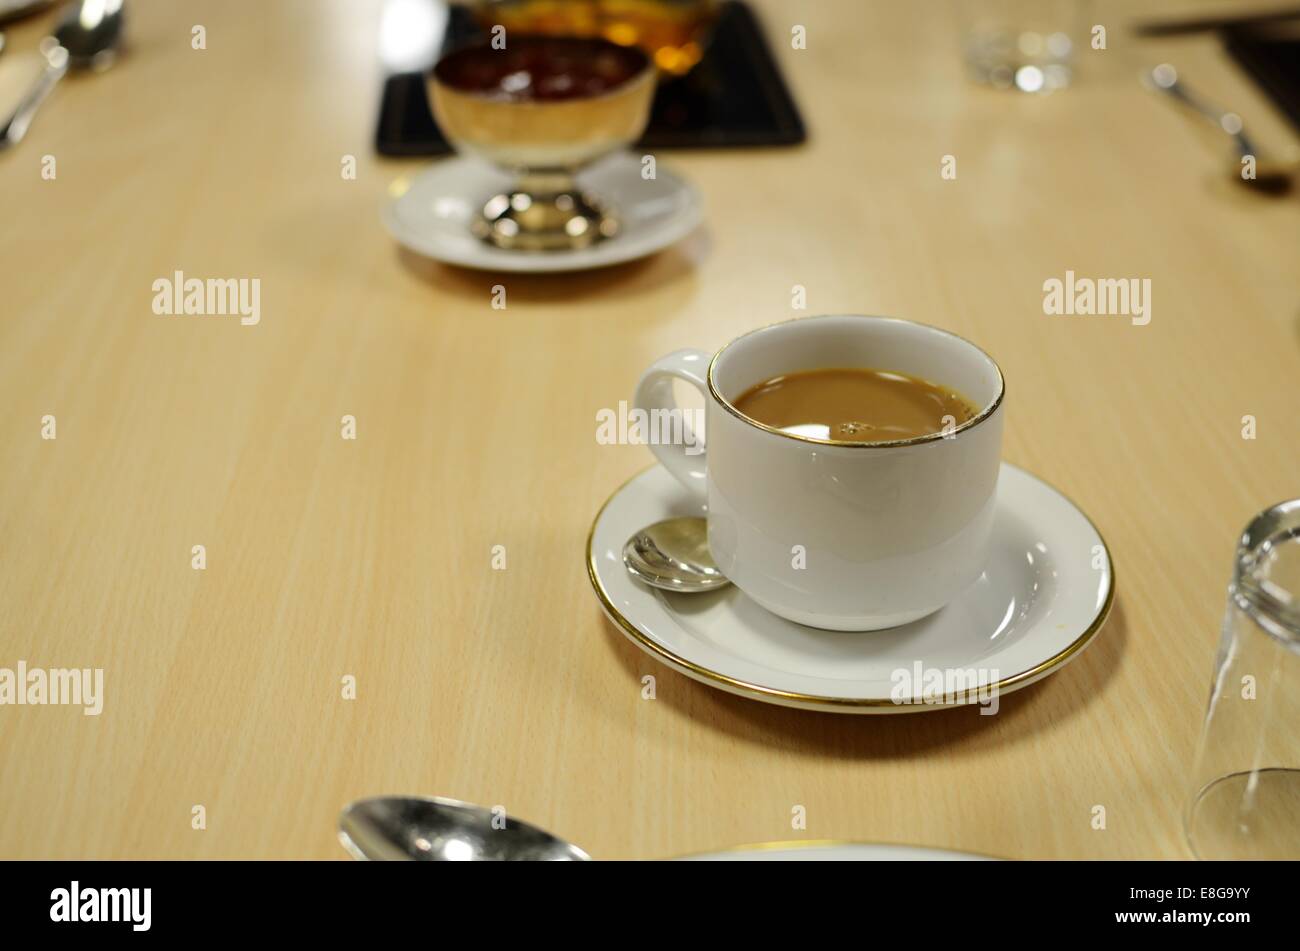 Cup of tea on a Formica covered table with cutlery and a dish of tomato ketchup in the background Stock Photo